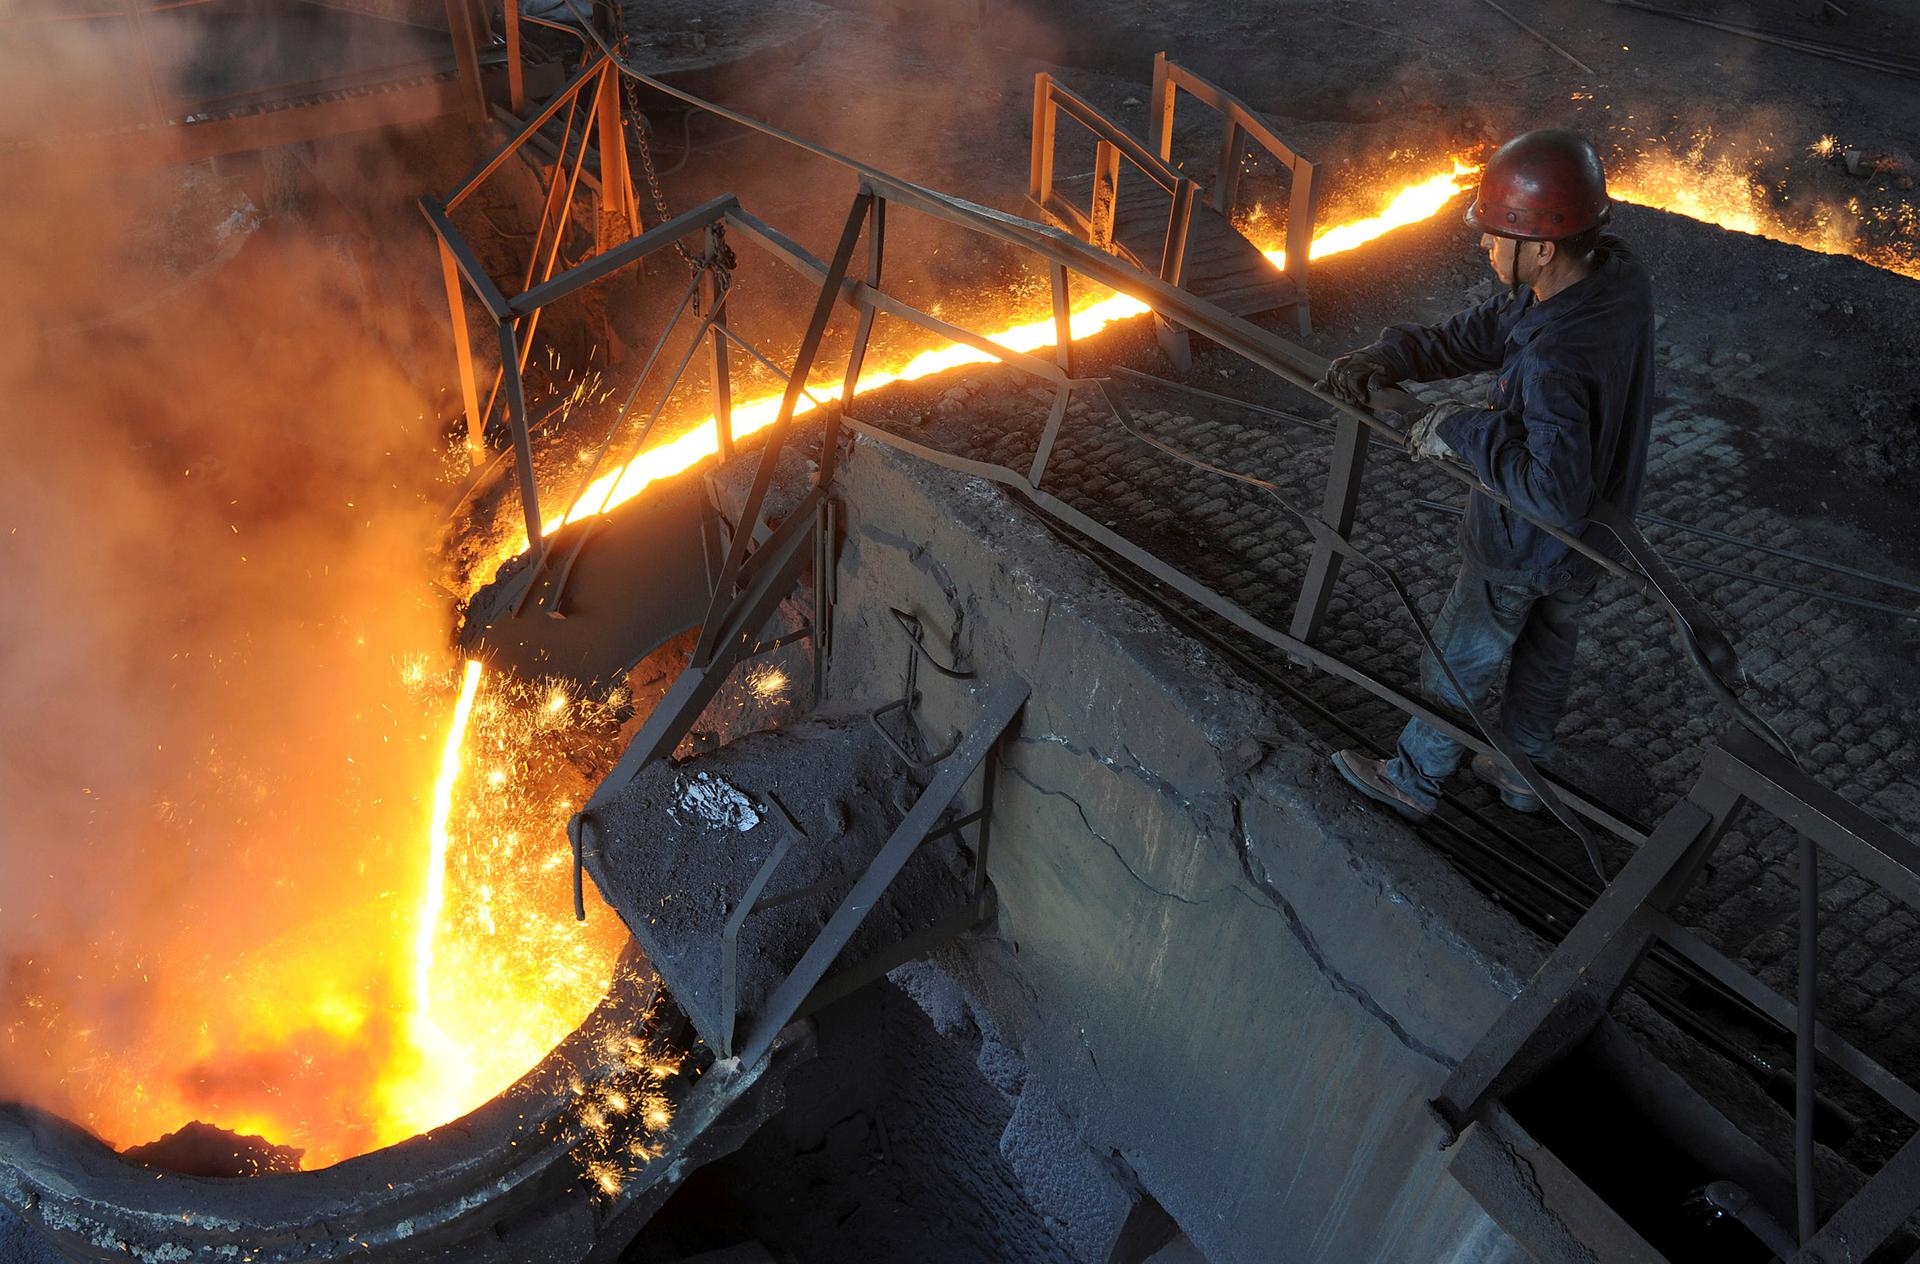 A worker monitors molten iron pouring into a furnace at steel manufacturing plant in Hefei, Anhui province, China. 